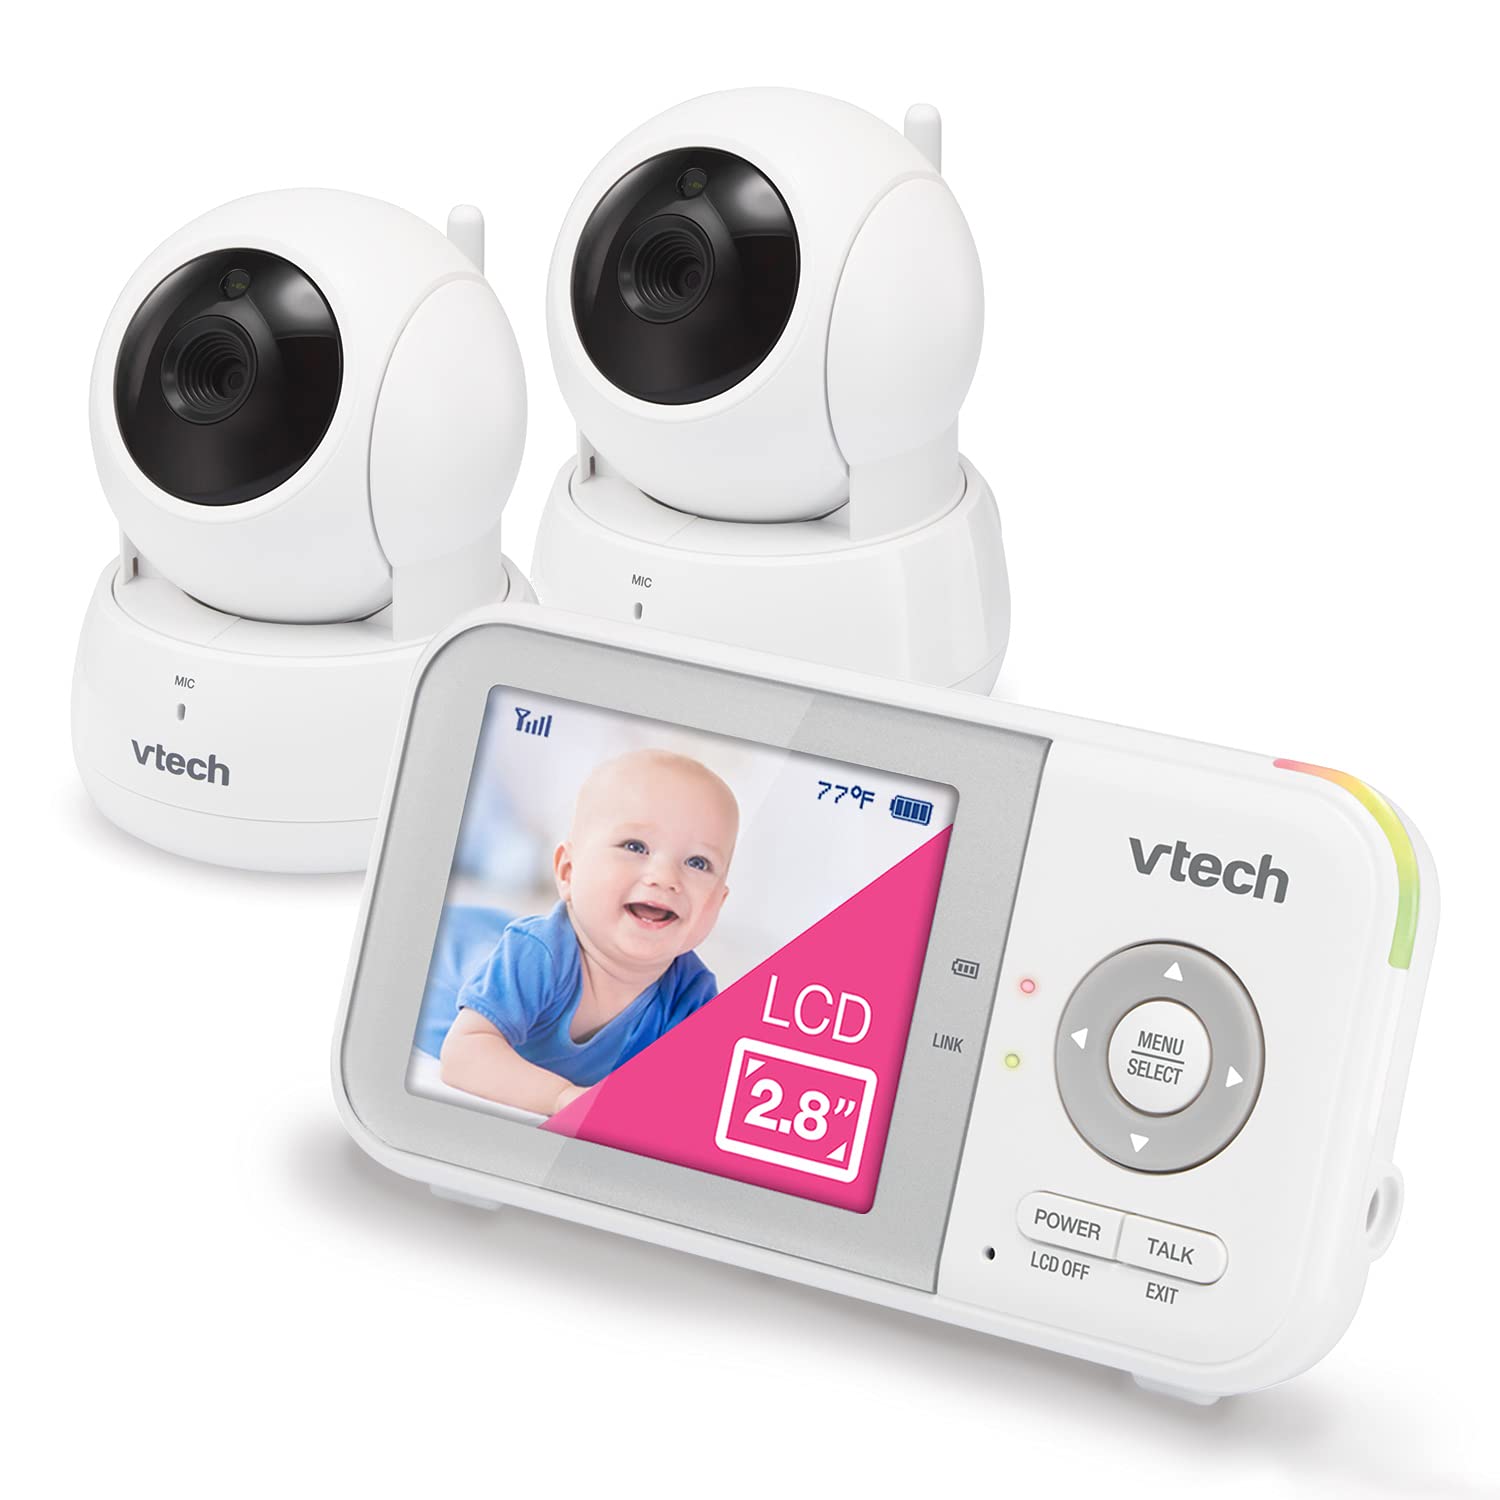 VTech VM923-2 Video Baby Monitor with 19-Hour Battery [...]